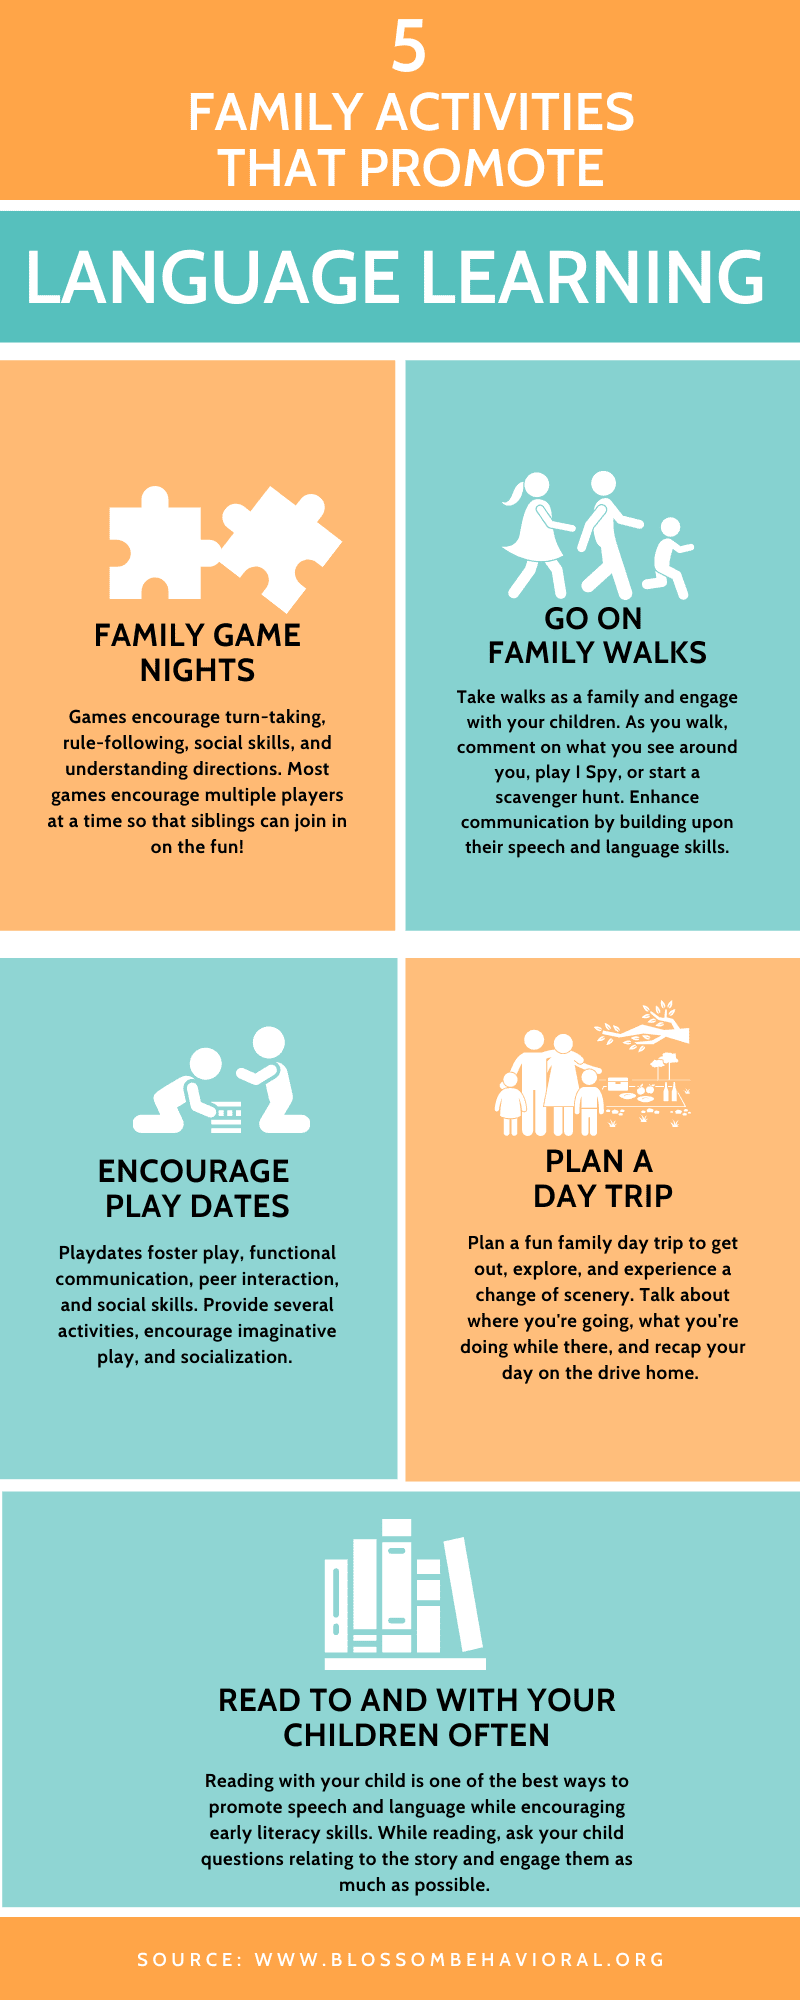 Five family activities that promote language learning